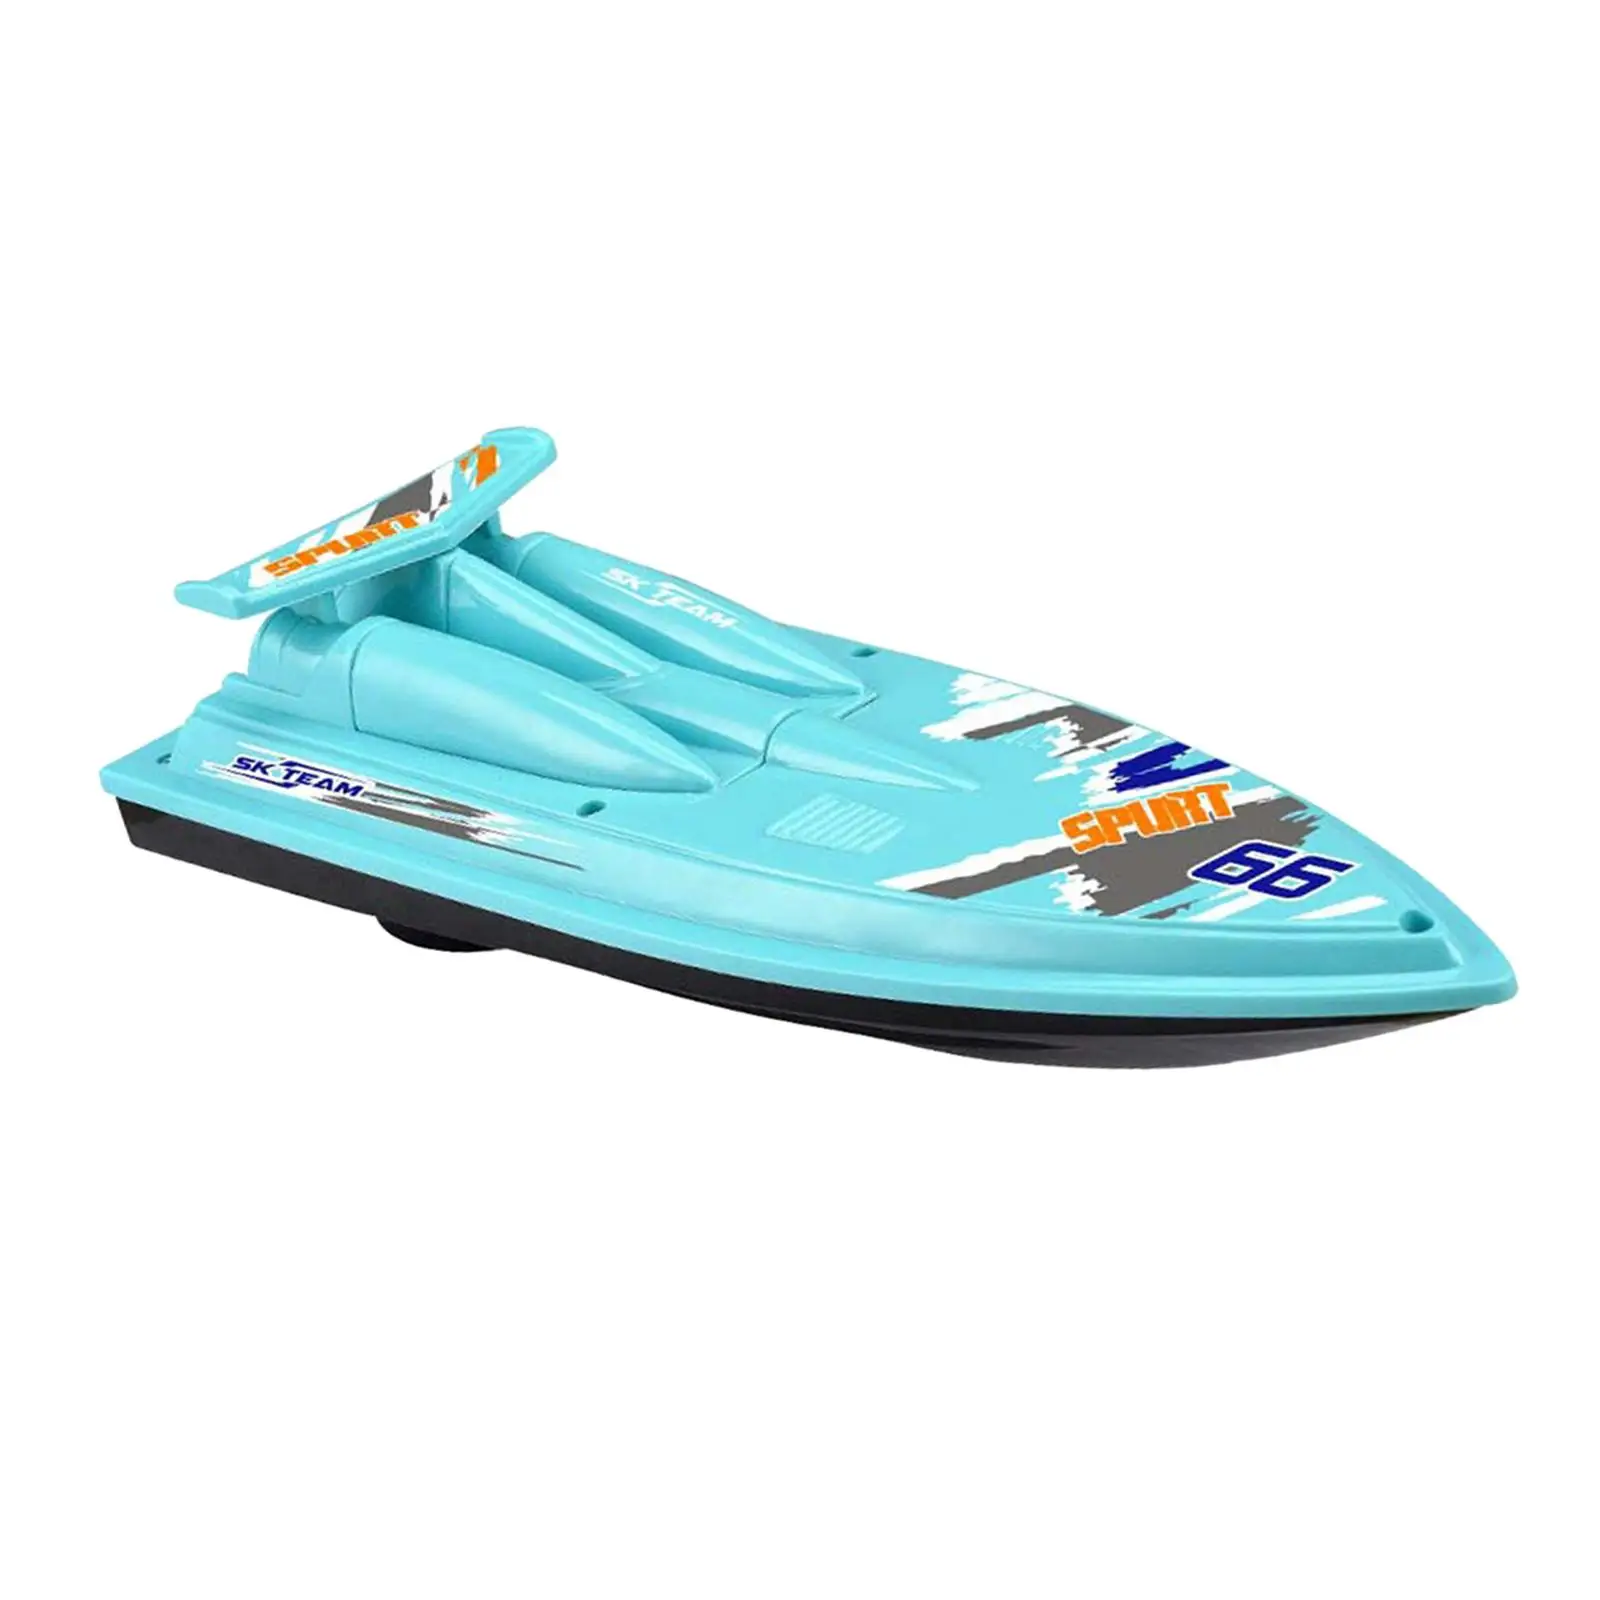 Speed Boat Bathtub Bath Toy Summer Outdoor Water Playing Funny Floating Toy Boat for Preschool Party Favors Birthday Shower Gift